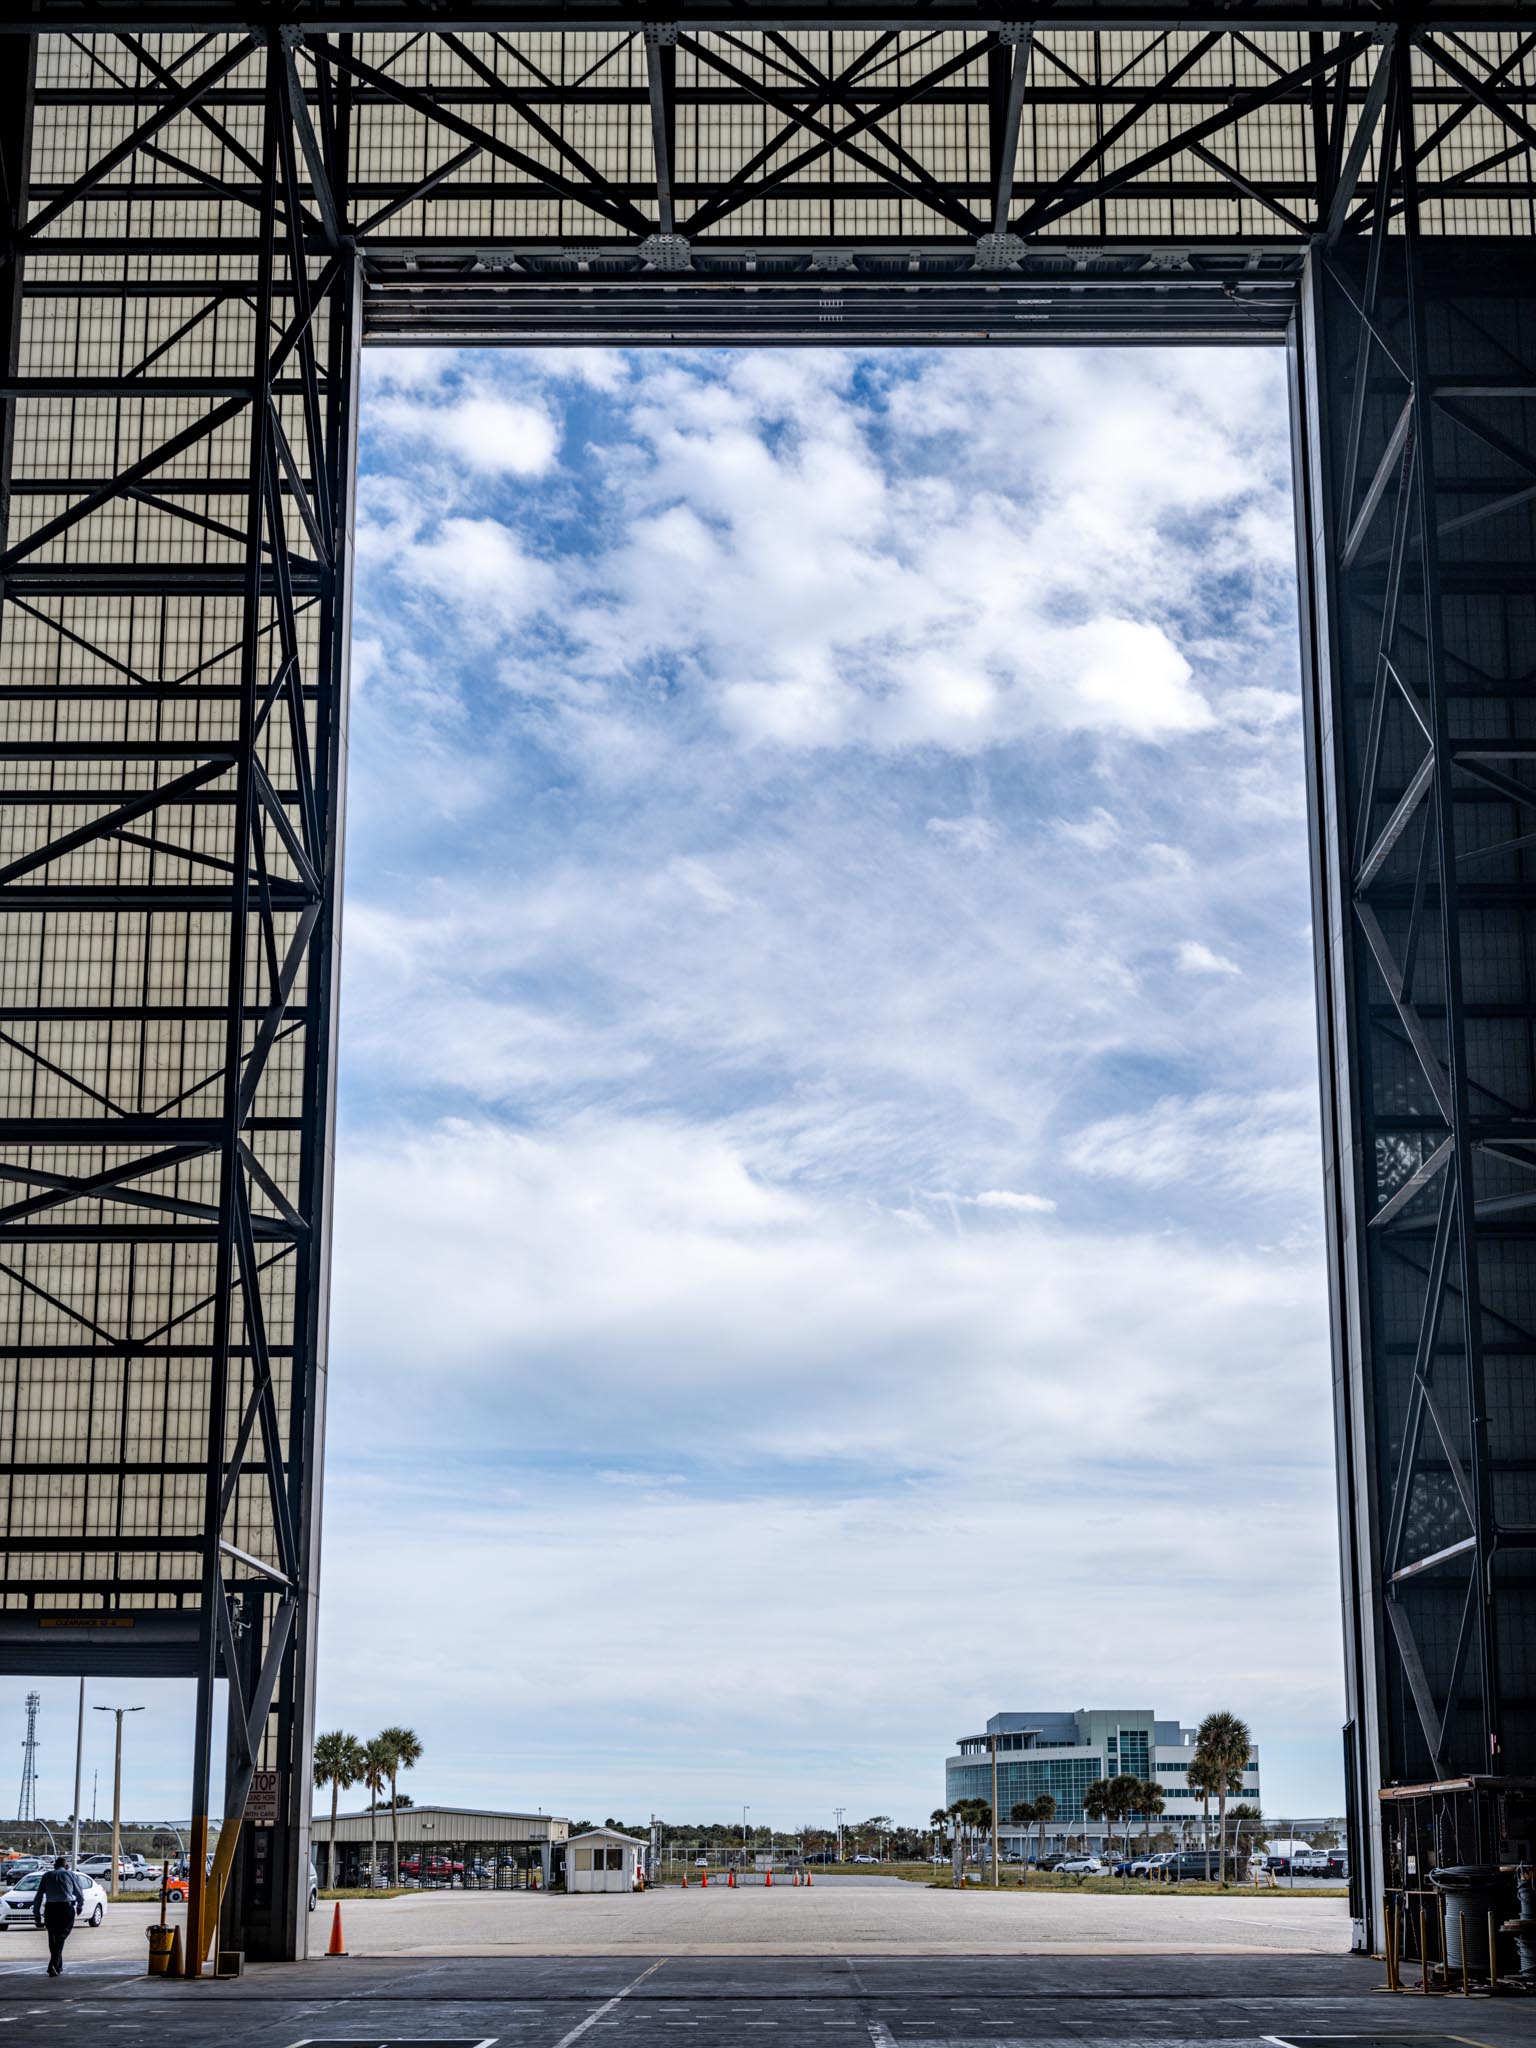 a large rectangular frame with a blue sky and clouds above